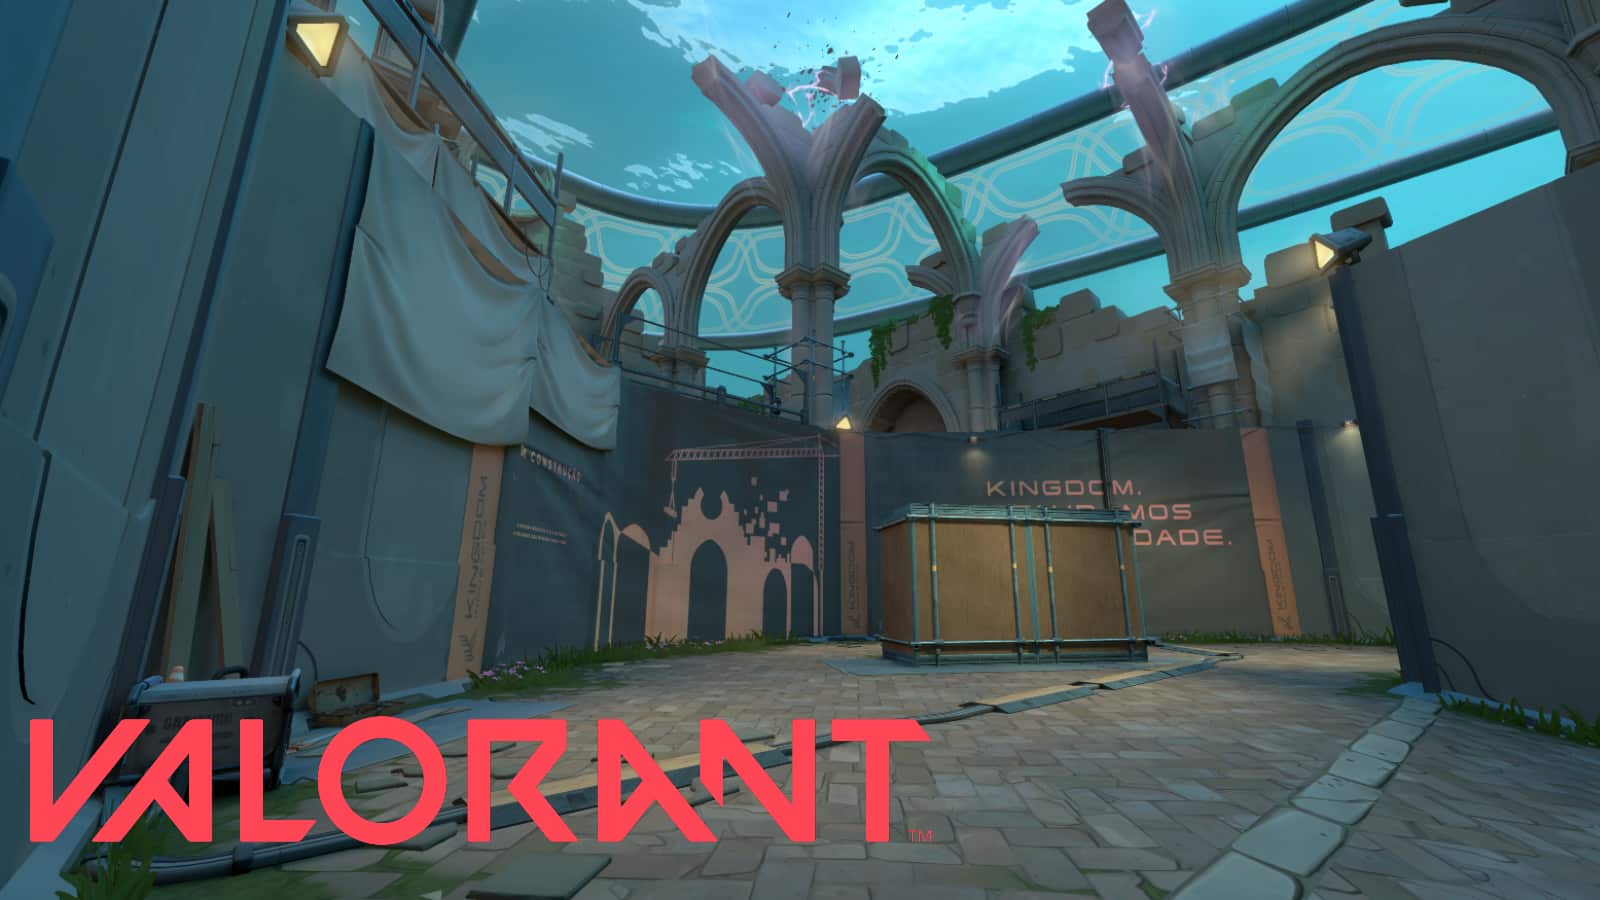 NEW ULTIMATE PEARL MAP GUIDE! - VALORANT PATCH 5.0 UPDATE! 